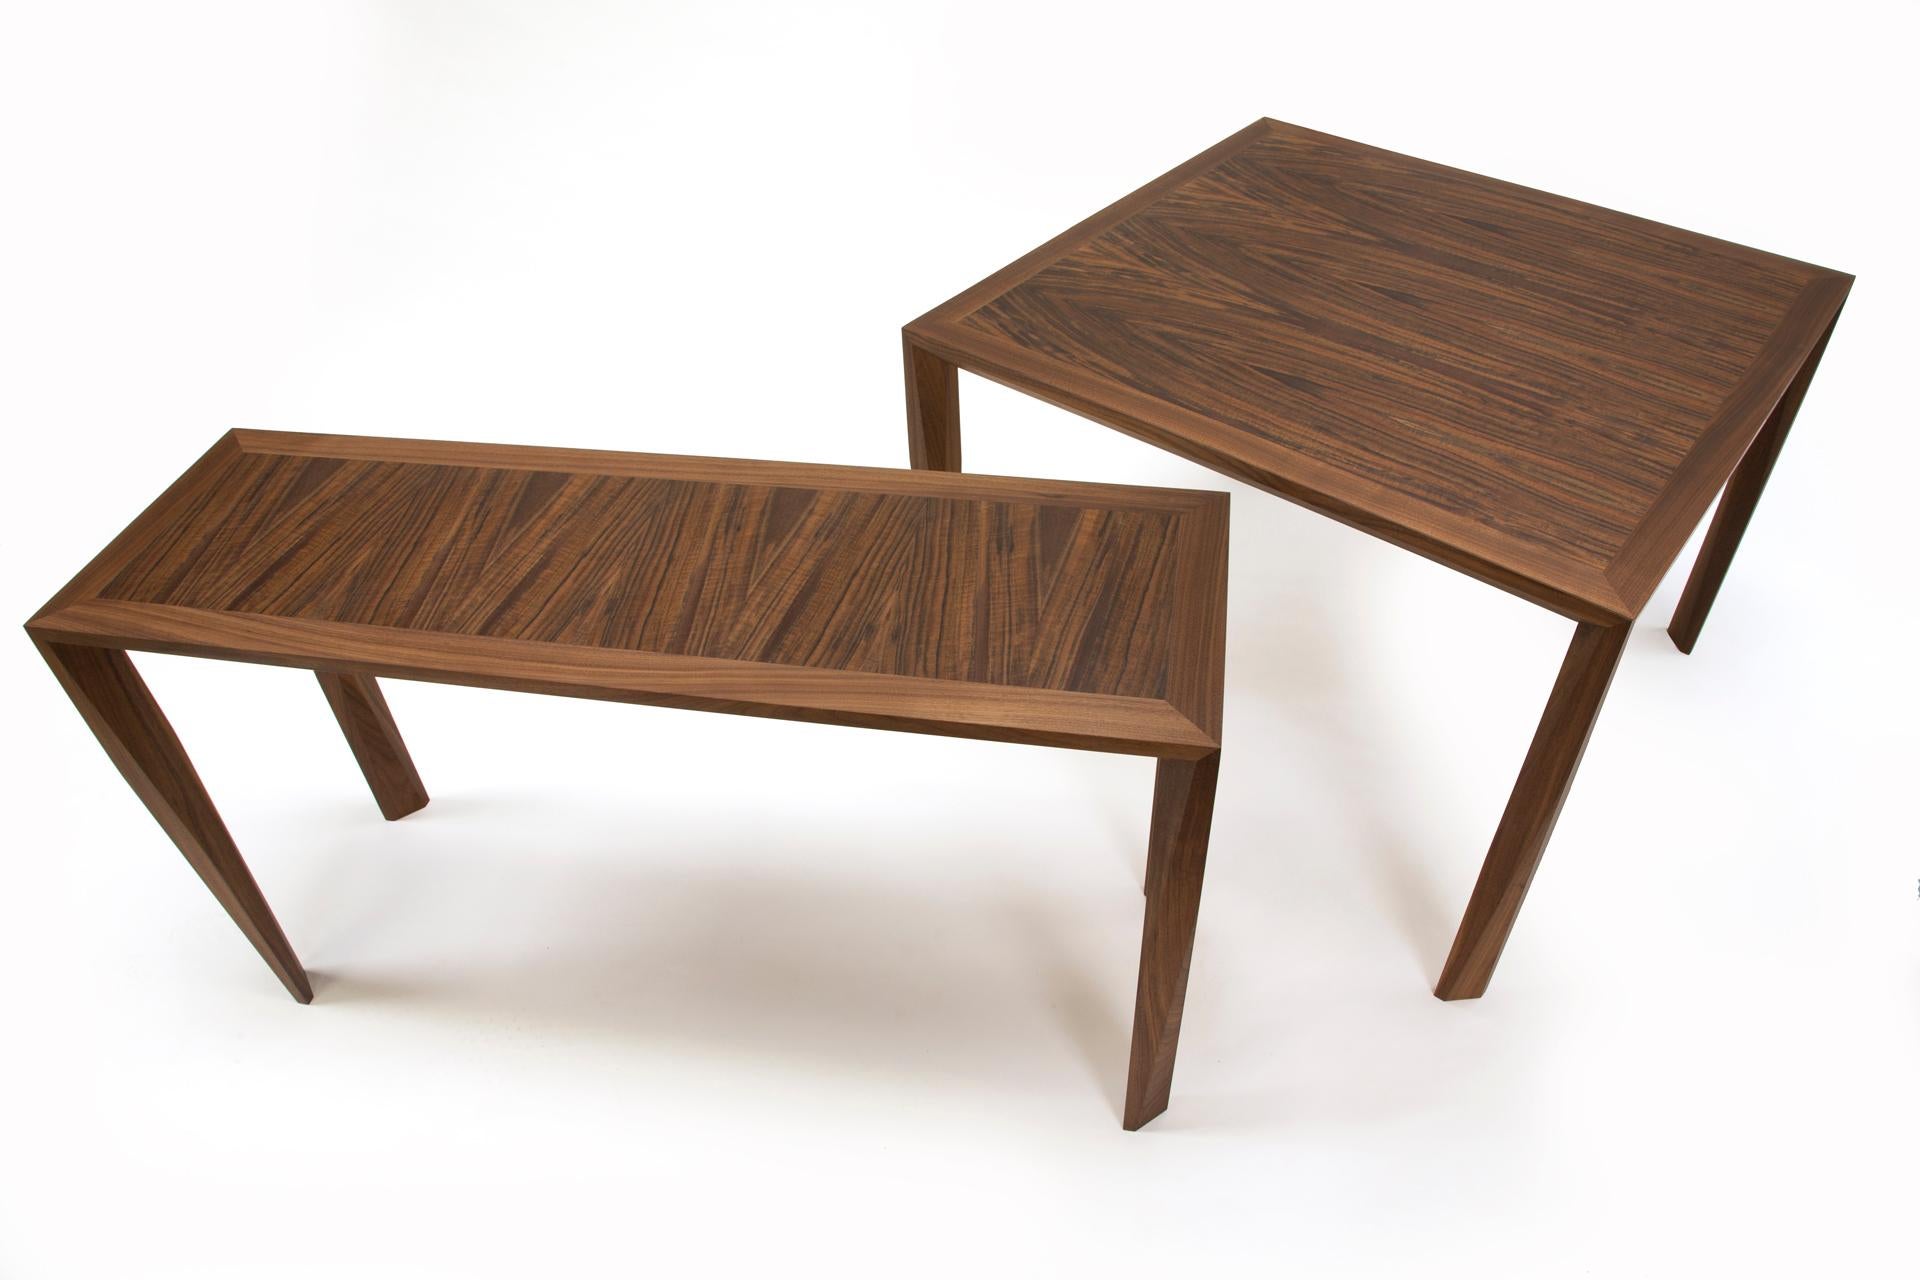 Modern Wood Console Table, in Walnut, by Studio DiPaolo In New Condition For Sale In Oakland, CA